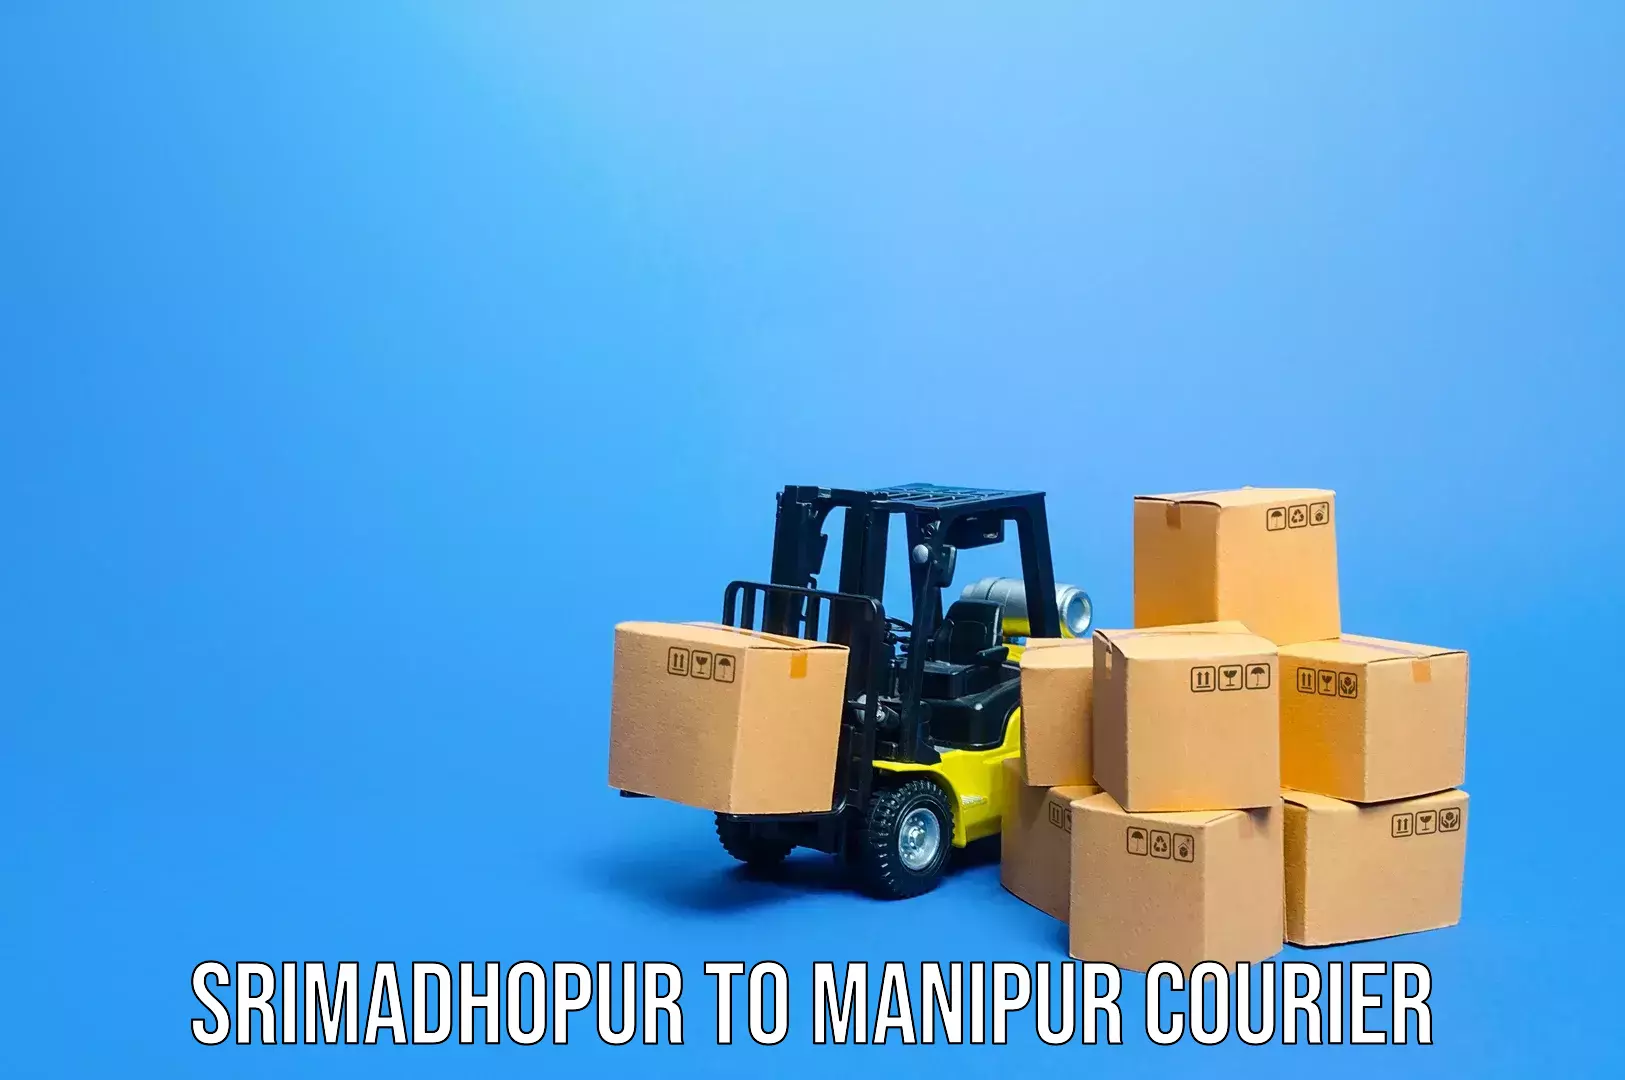 Instant baggage transport quote Srimadhopur to Manipur